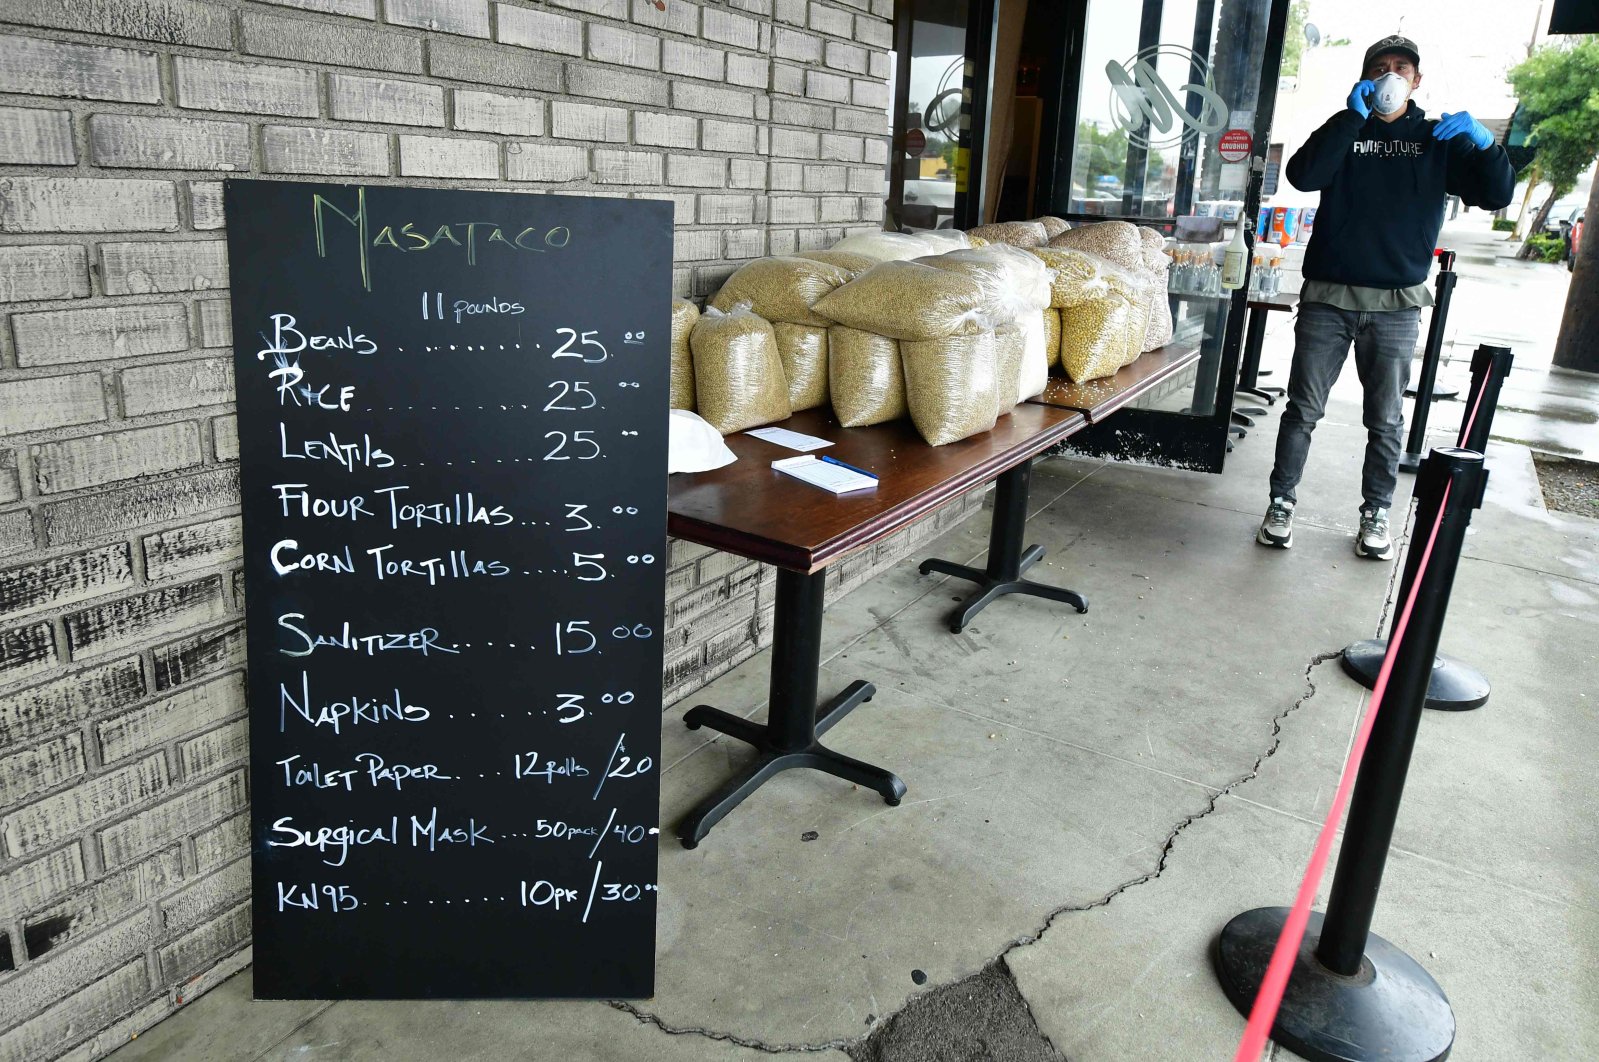 A menu lists items for sale outside David Fuertes's taco shop Masataco in Whittier, California, April 9, 2020. (AFP Photo)